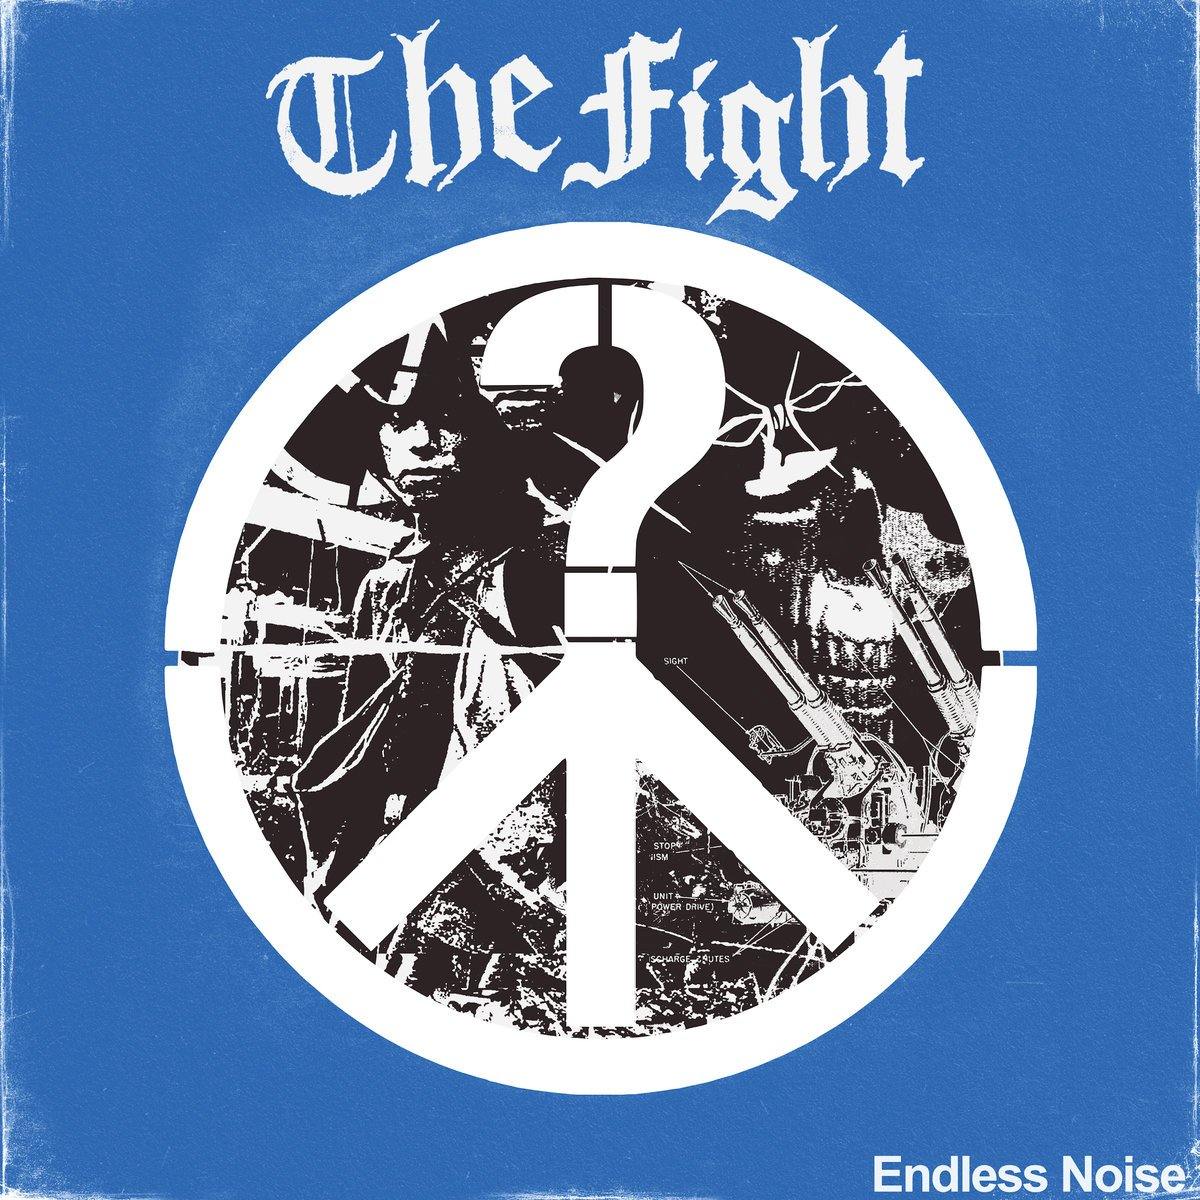 Buy – The Fight "Endless Noise" 12" – Band & Music Merch – Cold Cuts Merch